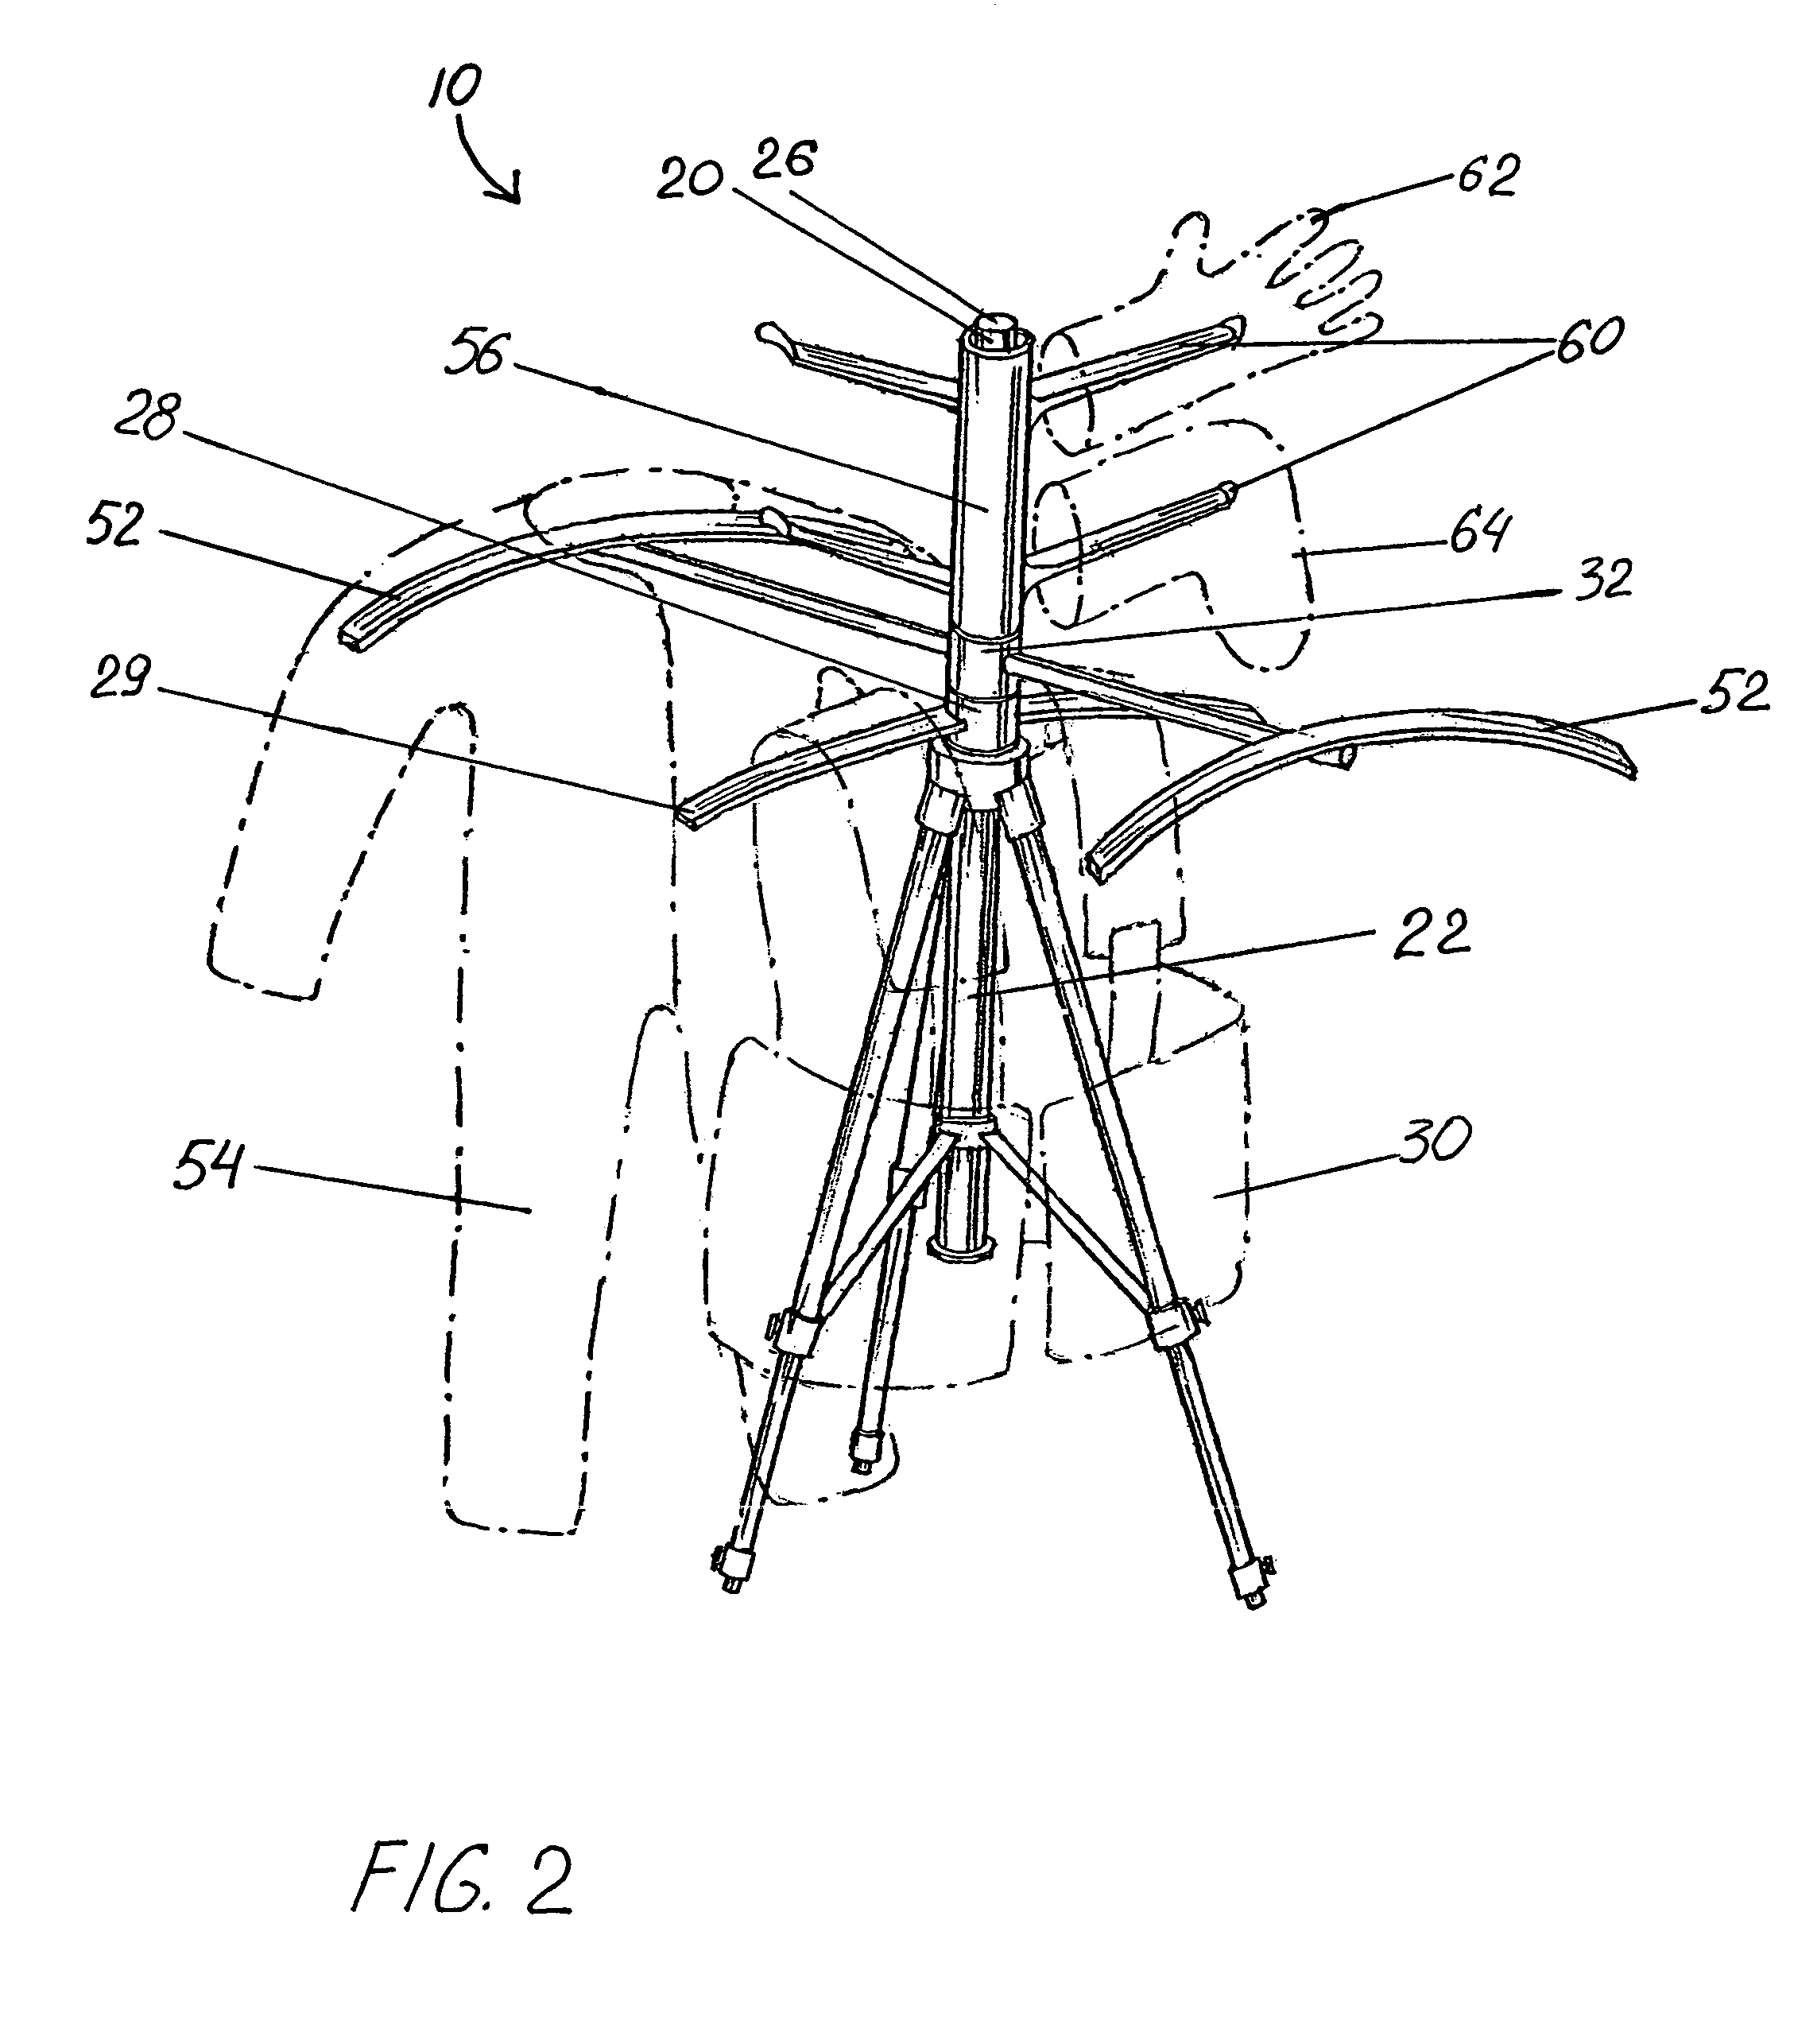 Apparatus for drying scuba diving gear